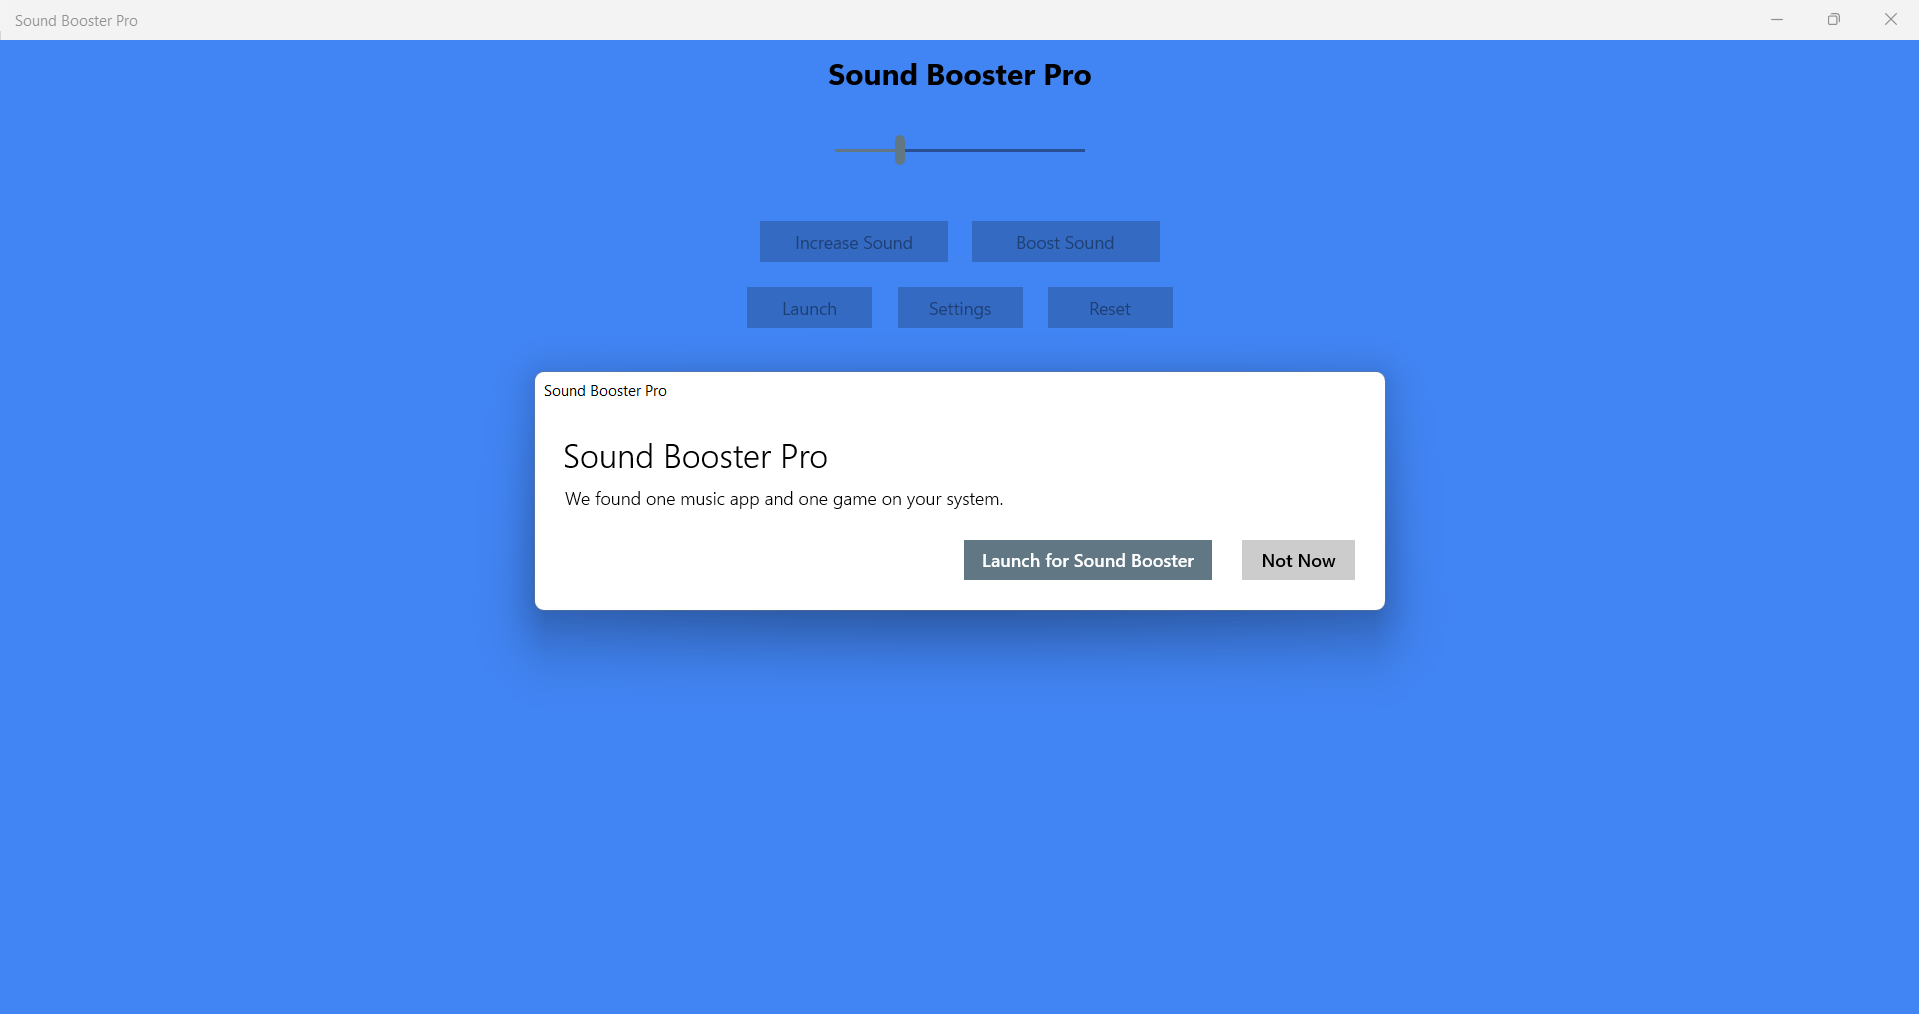 Sound Booster Pro